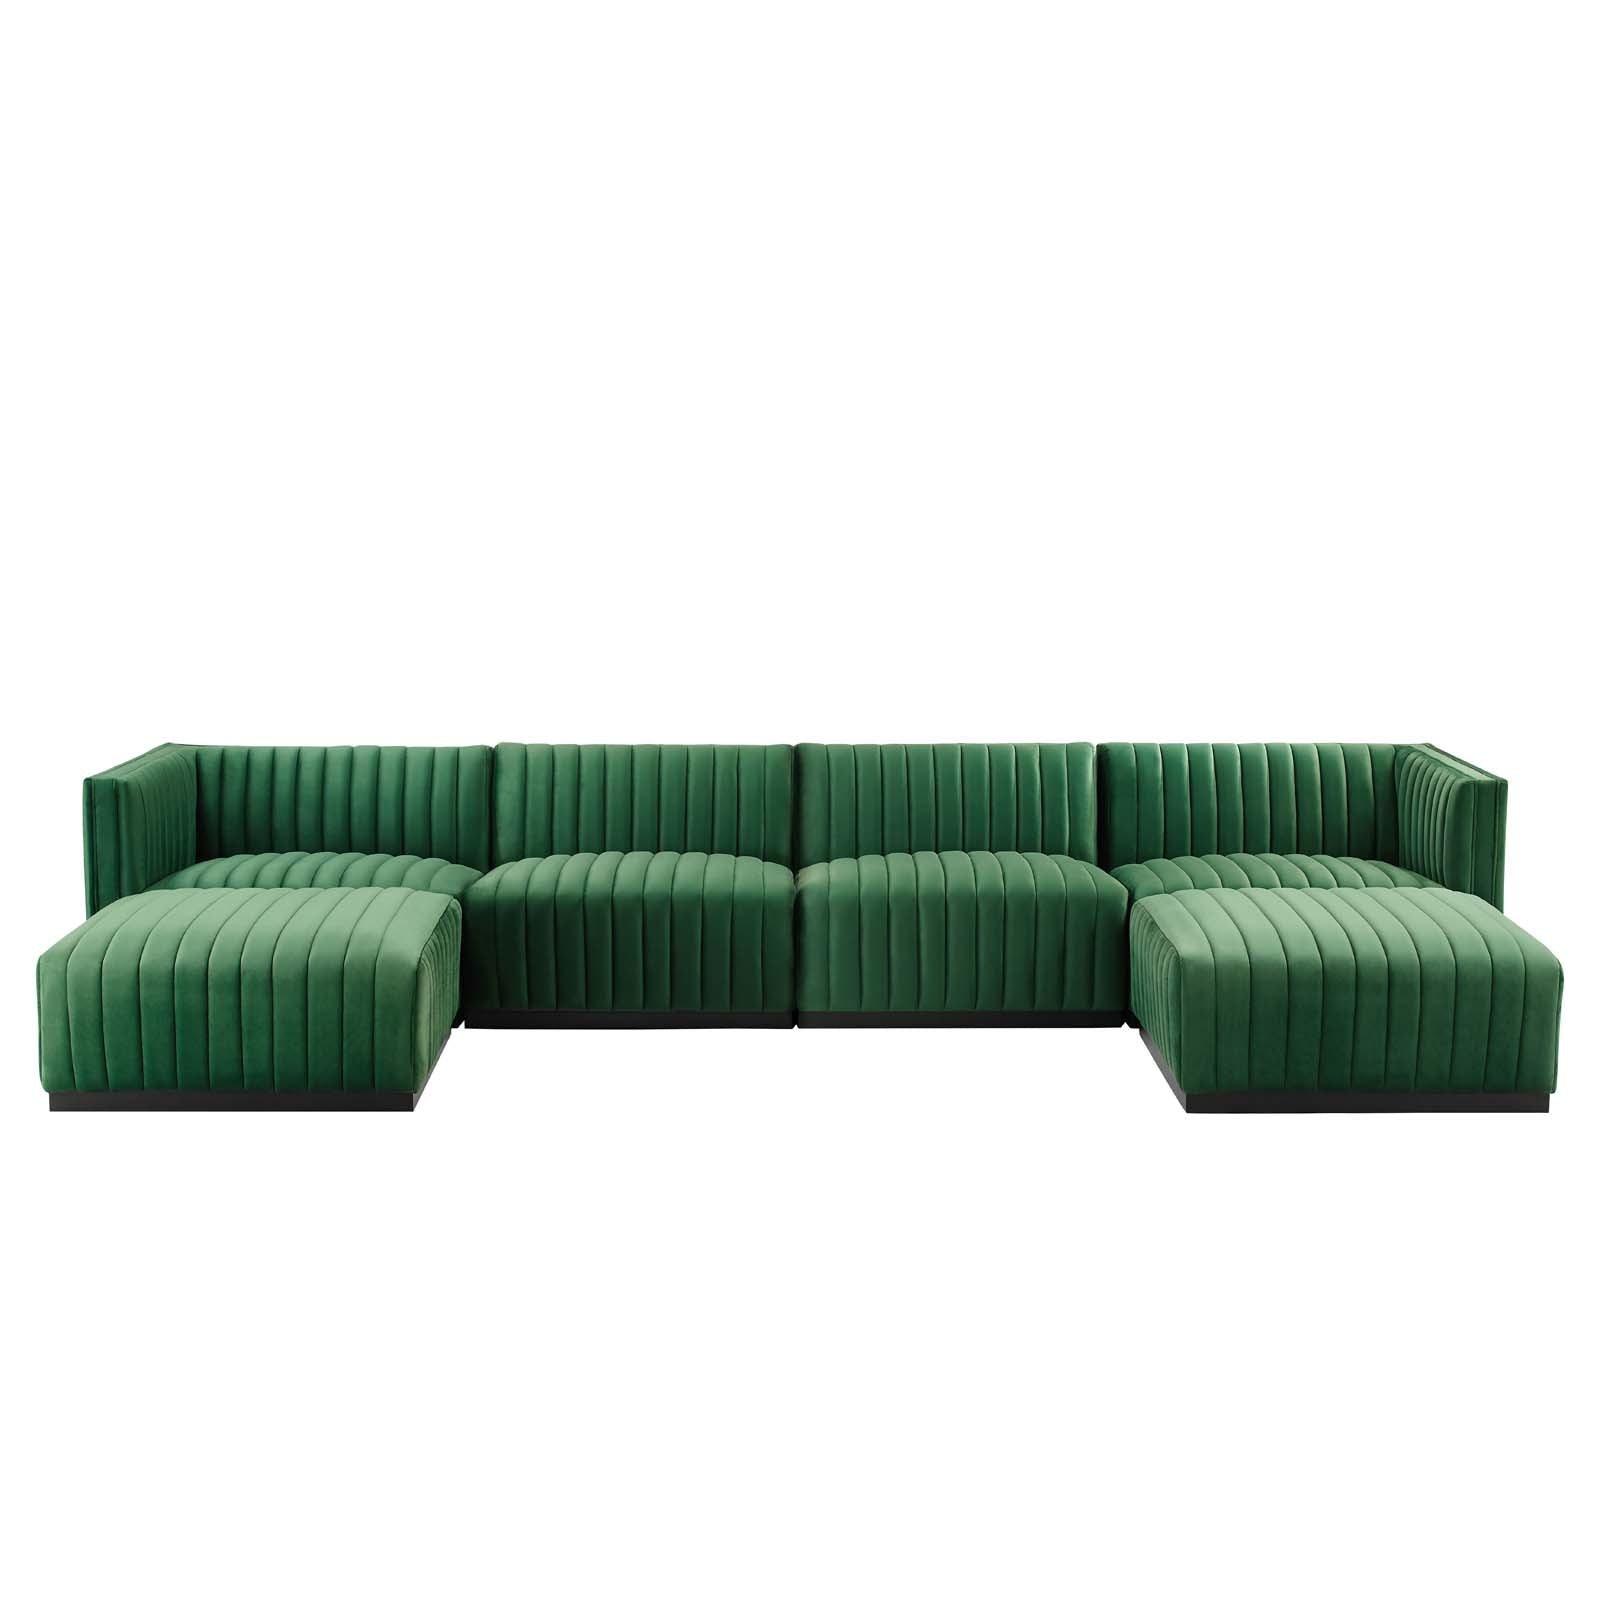 Modway Sectional Sofas - Conjure Channel Tufted Performance Plywood Velvet 6-Piece Sectional Black Emerald